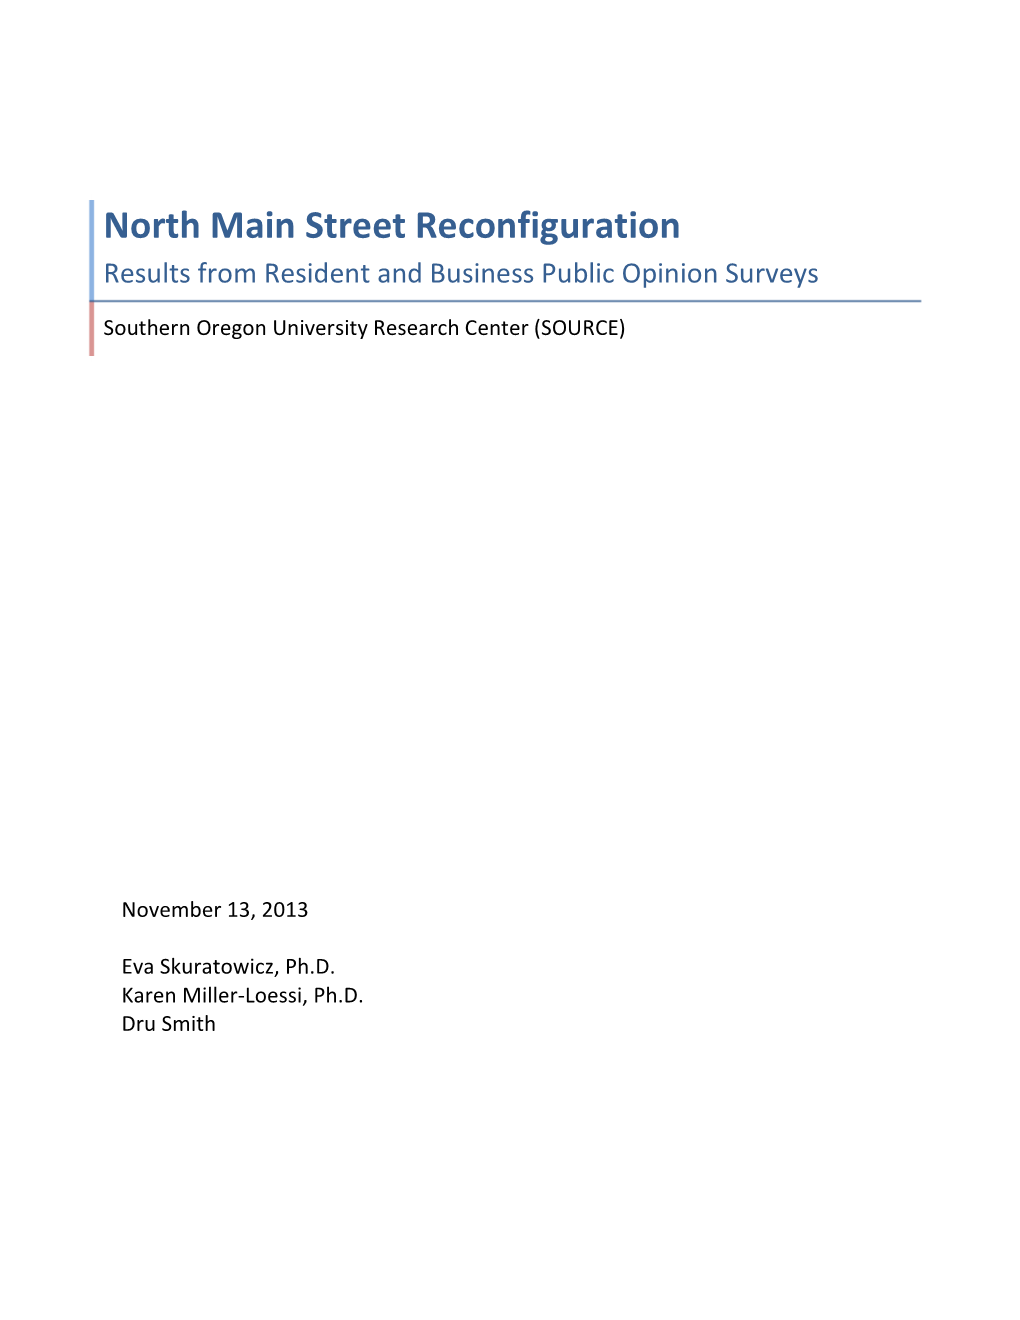 North Main Street Reconfiguration Results from Resident and Business Public Opinion Surveys Southern Oregon University Research Center (SOURCE)